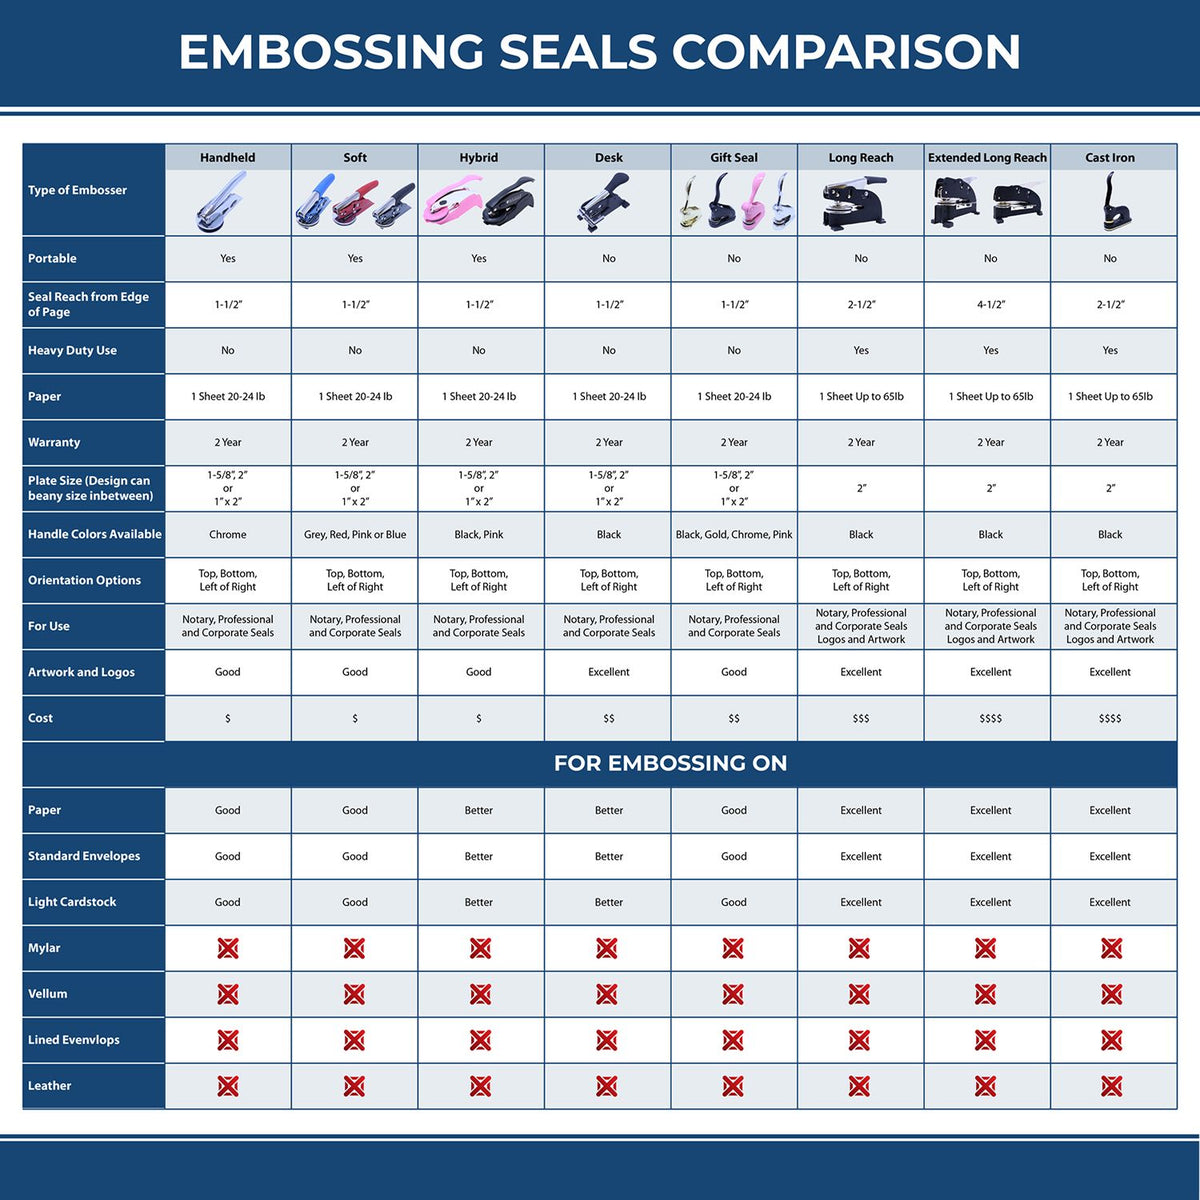 A comparison chart for the different types of mount models available for the Hybrid Oklahoma Engineer Seal